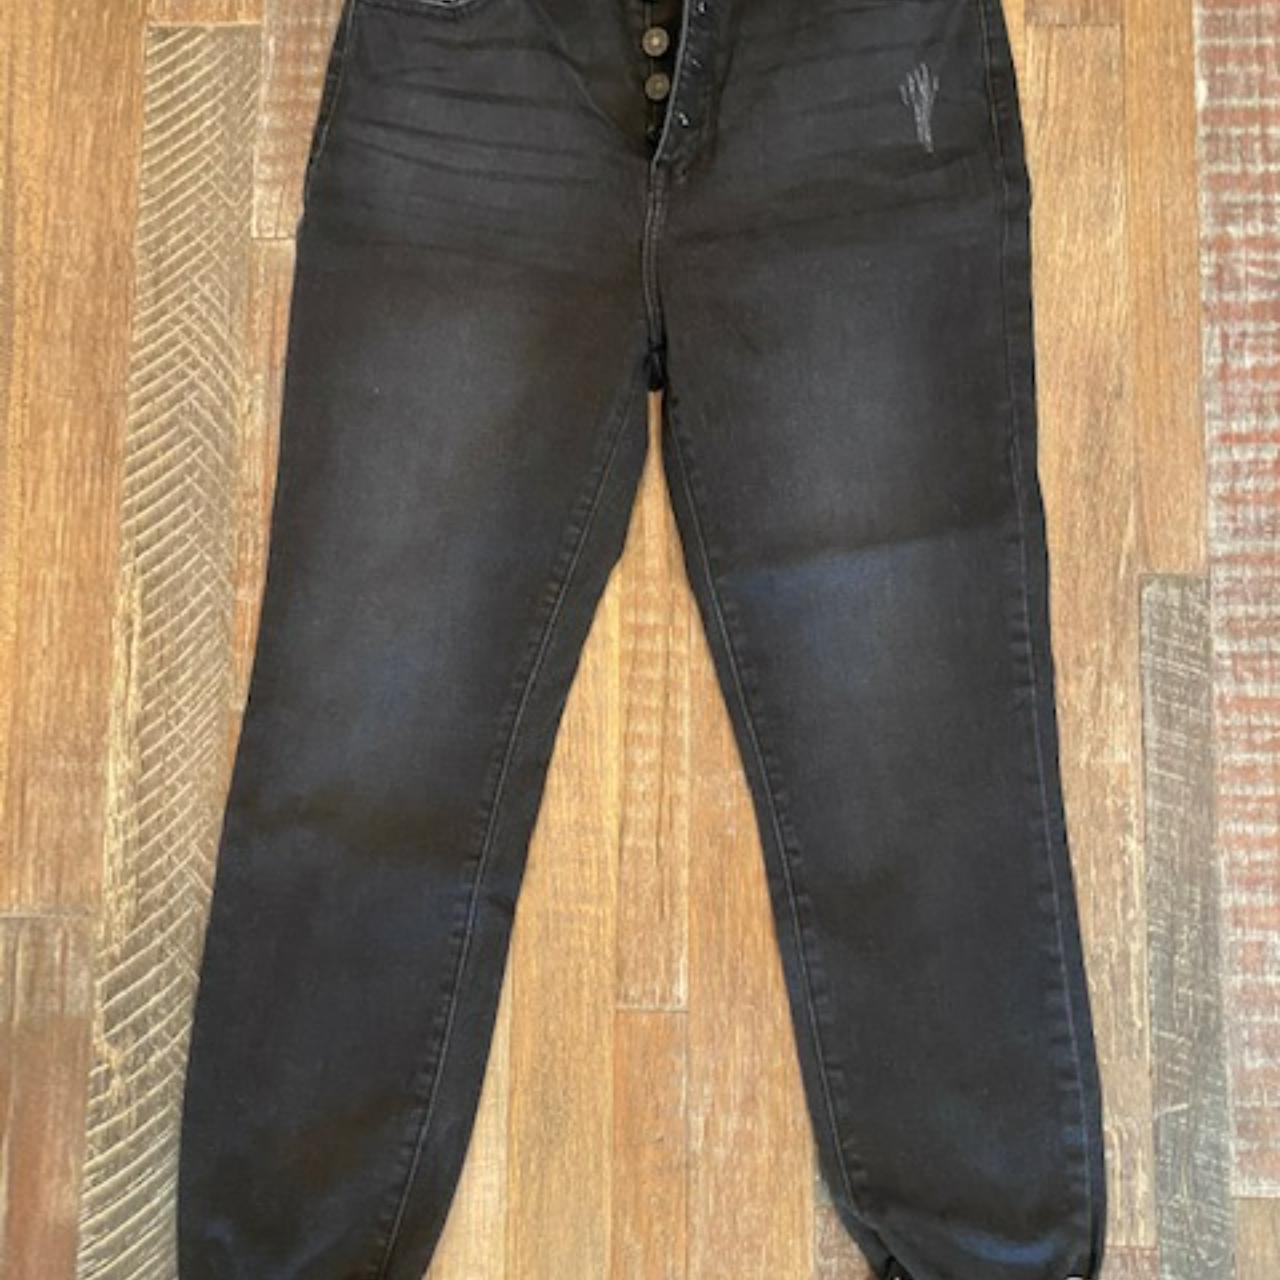 Ken Can Stretch Jeans Black size 13/30 Pants are IN... - Depop